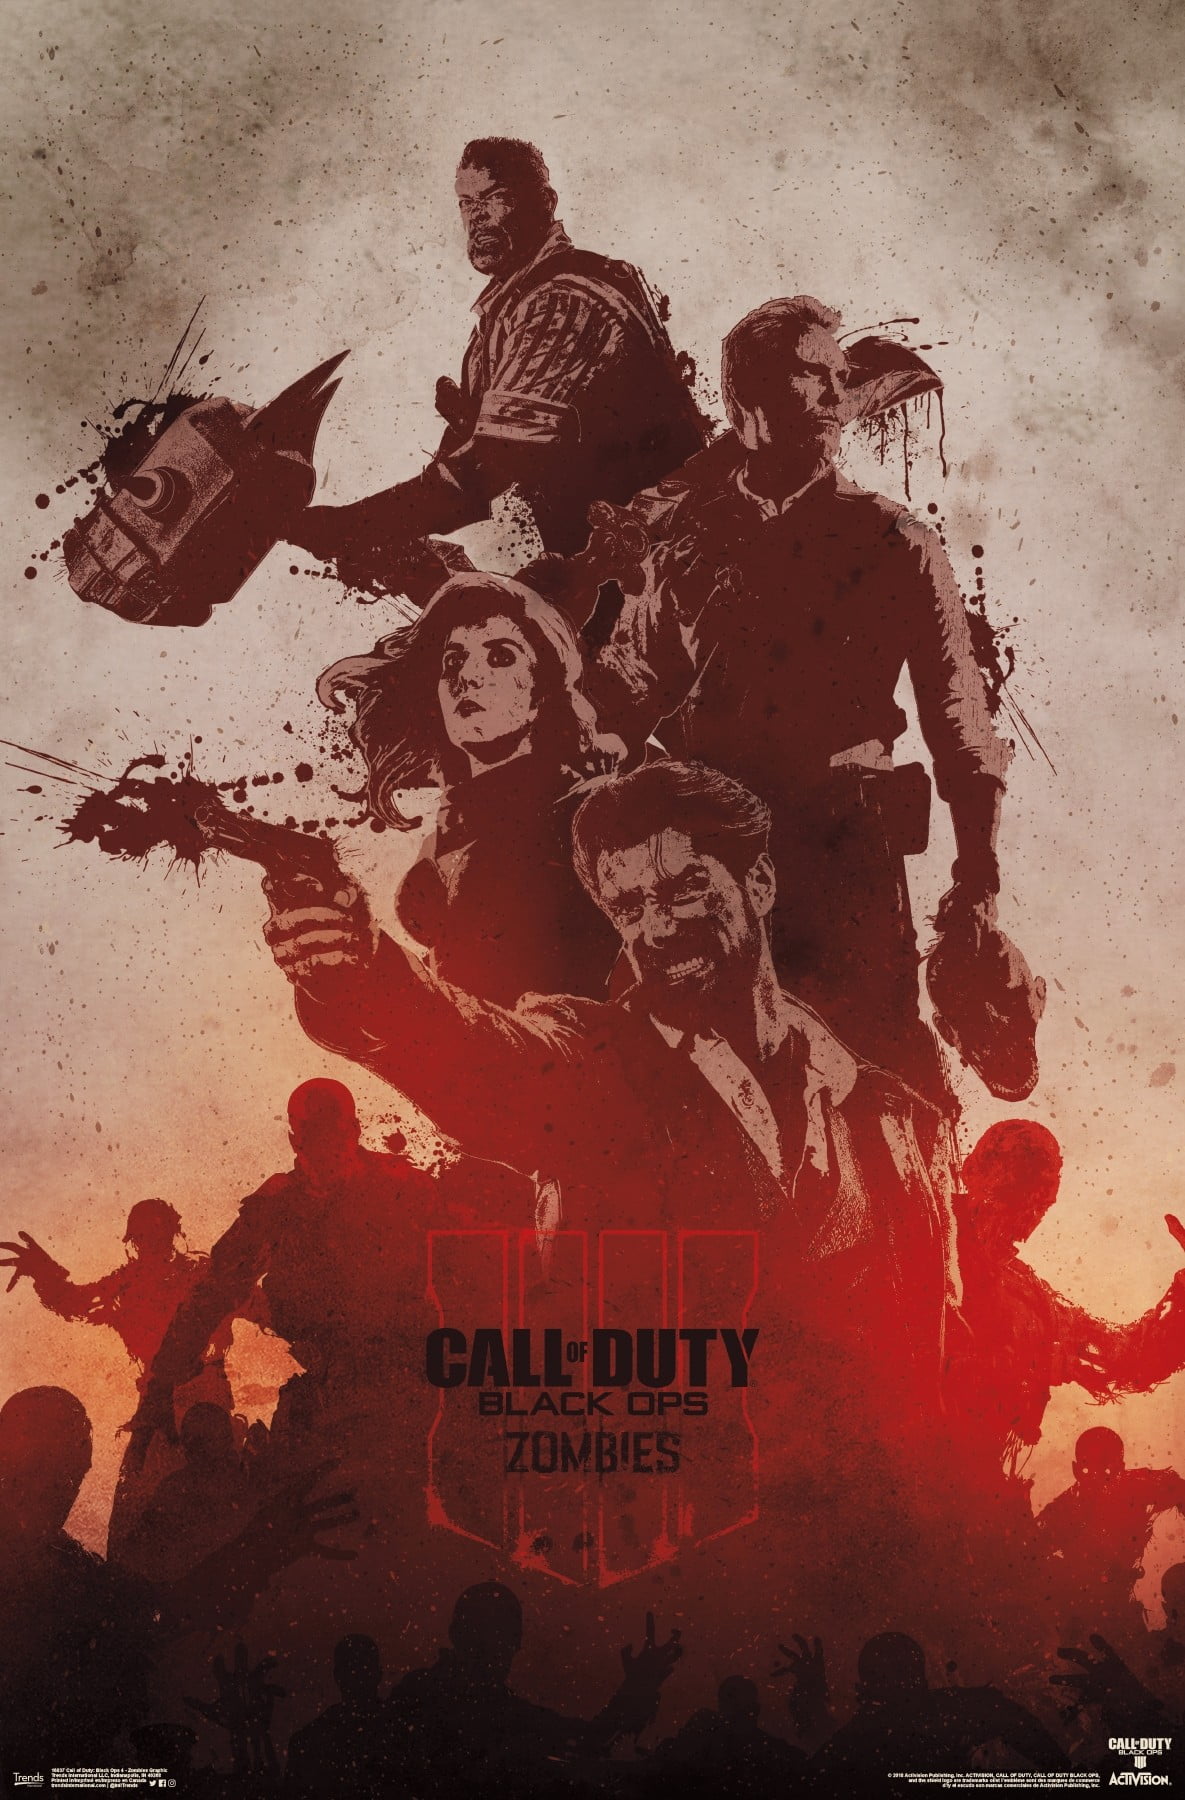 Call of Duty Black Ops 4 - Zombies Graphic Poster Print, Wal-mart, Walmart....